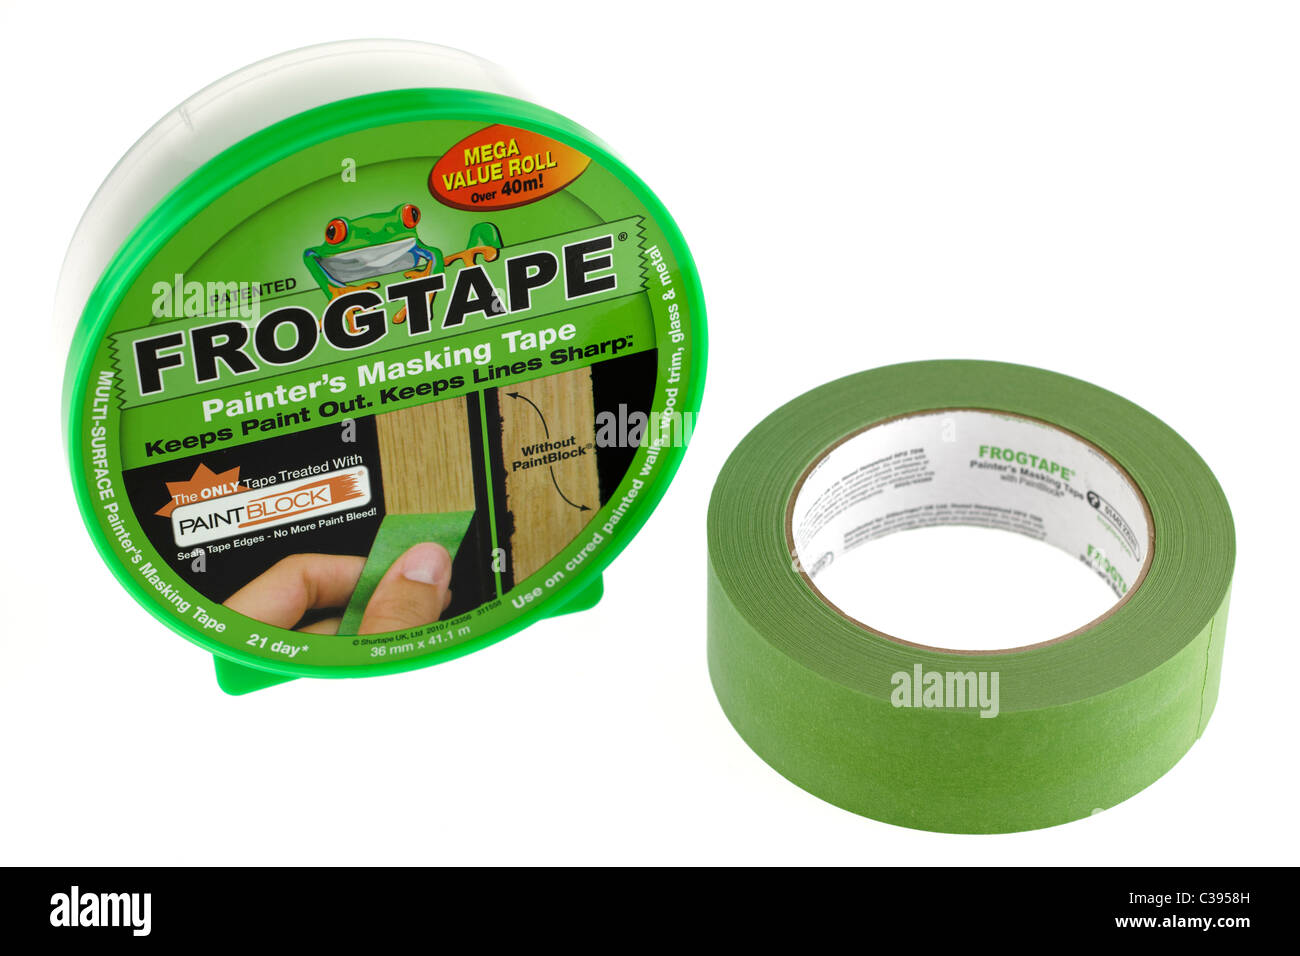 Frog Tape Green Multi Surface Painters Masking Tape 48mm x 41.1m. Indoor  Painting and Decorating for Sharp Lines and no Paint Bleed 